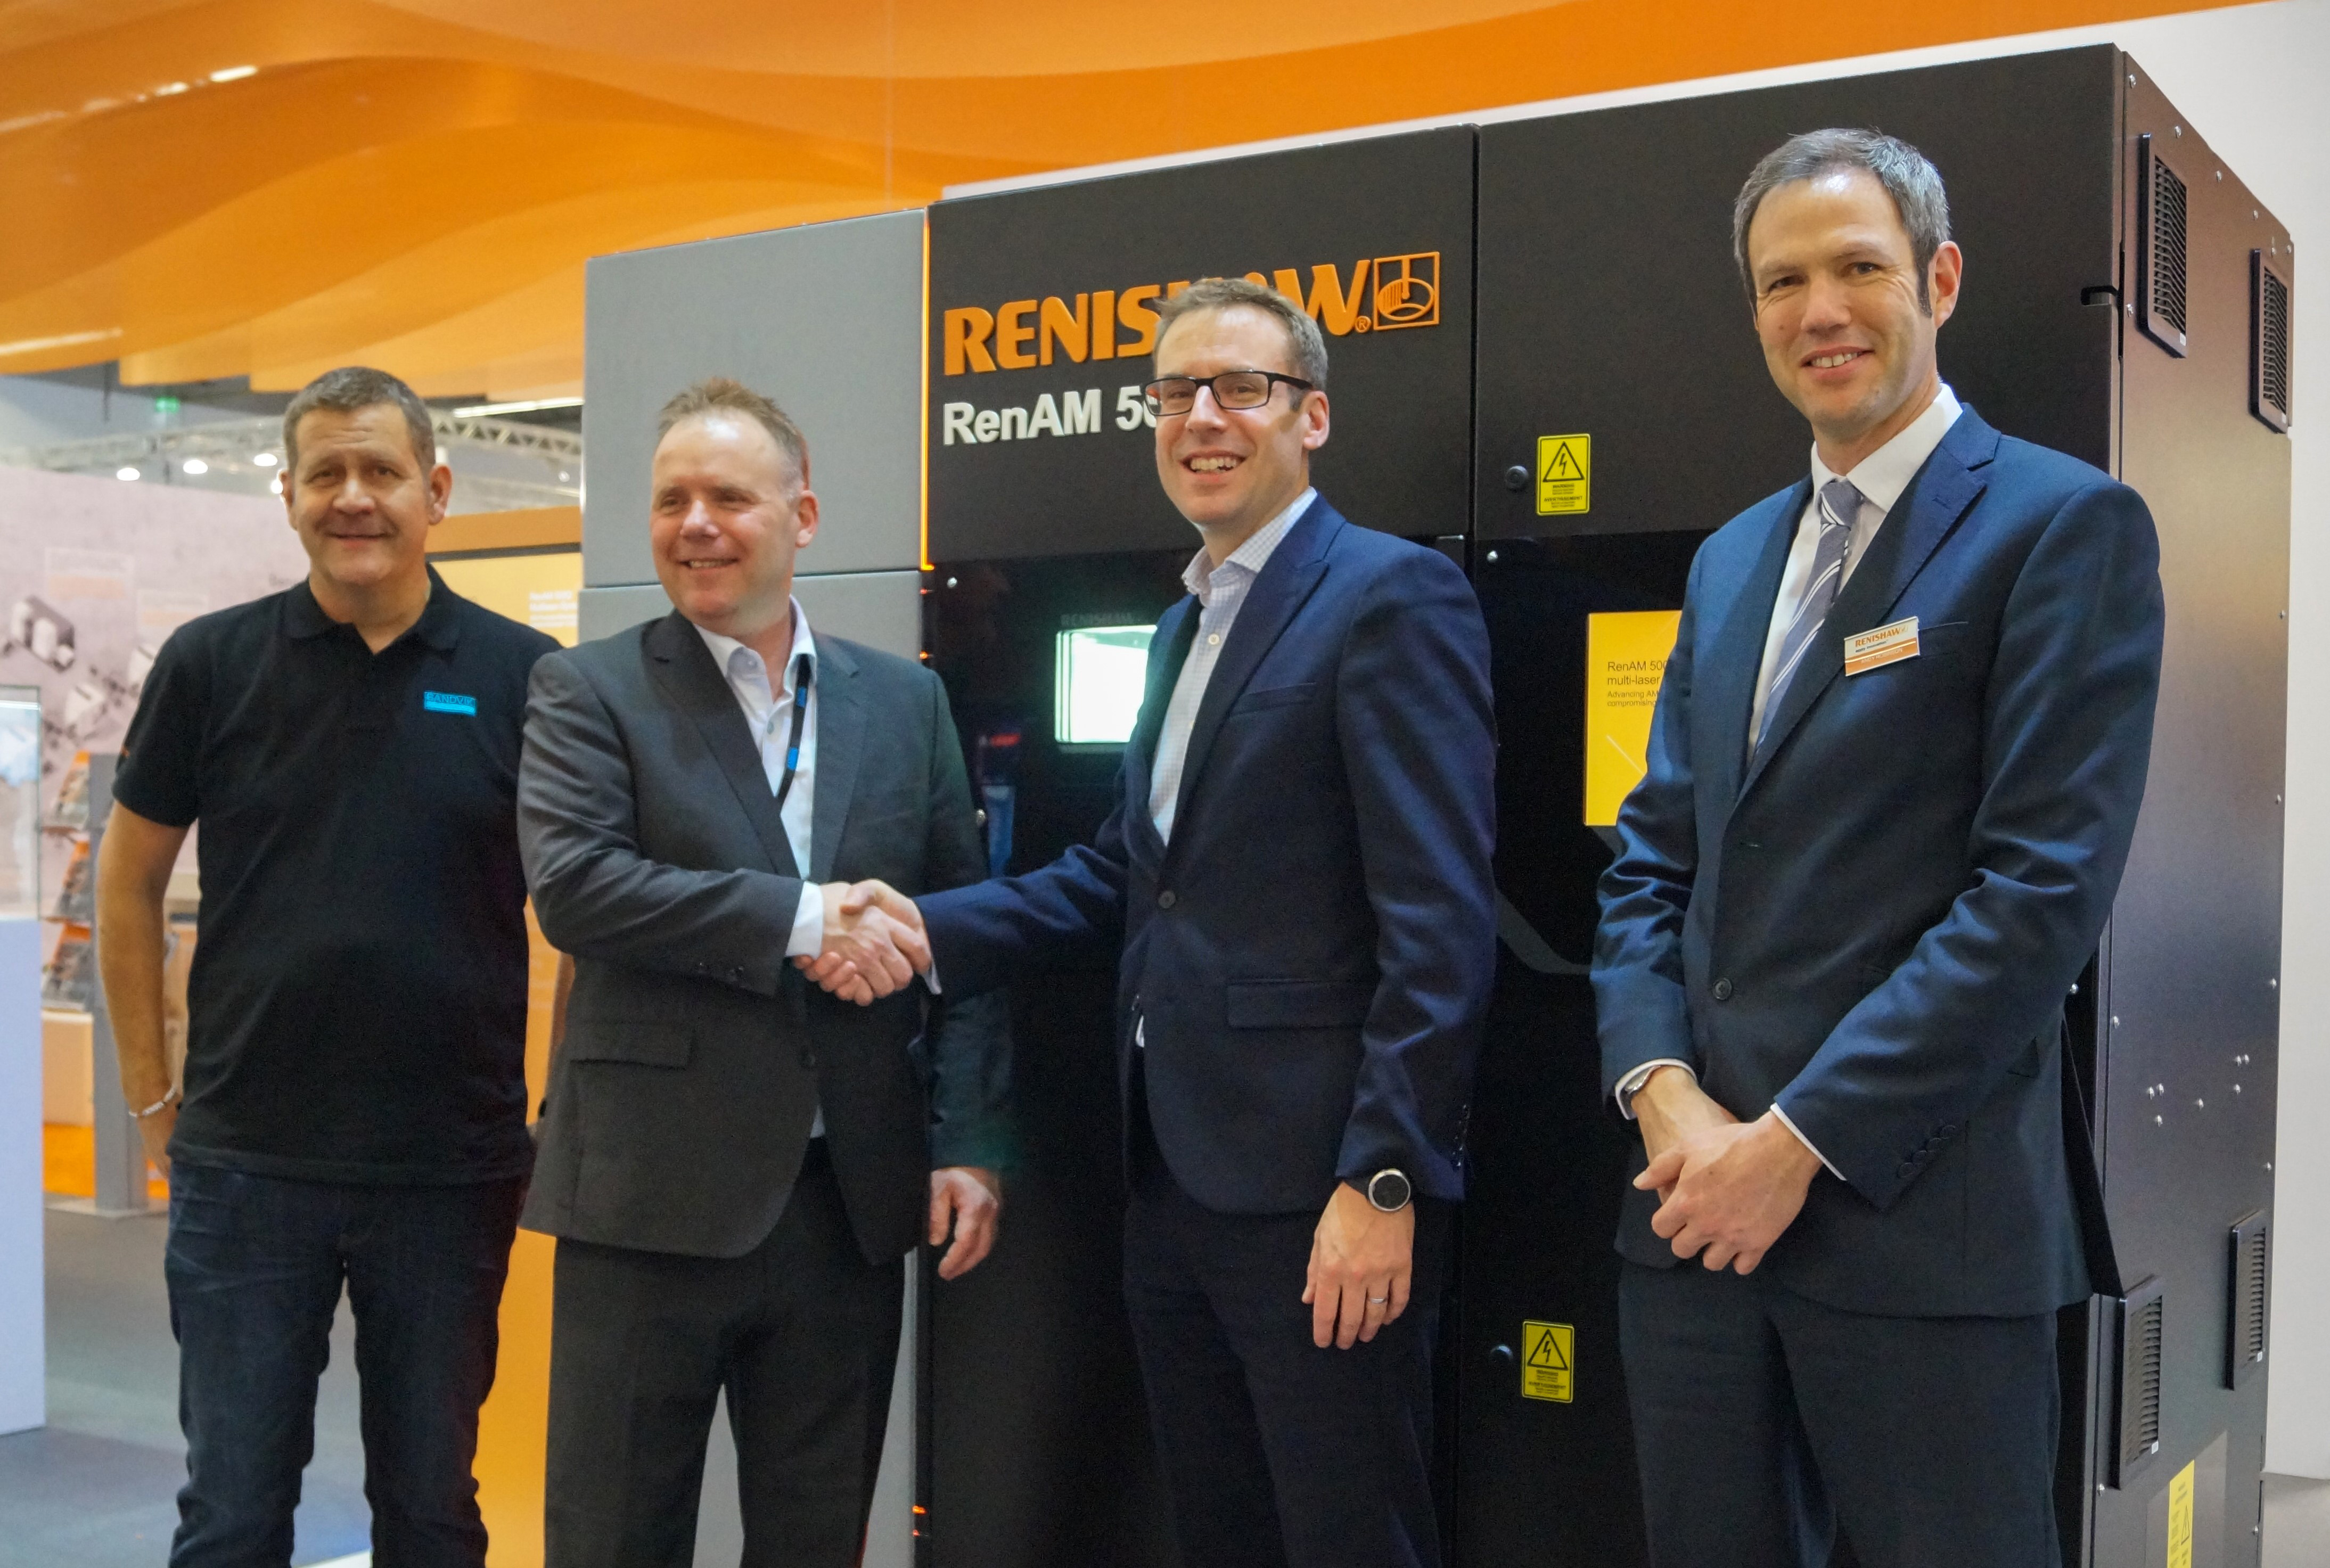 Sandvik and Renishaw collaborate to qualify new materials for Additive Manufacturing. Photo via Sandvik.